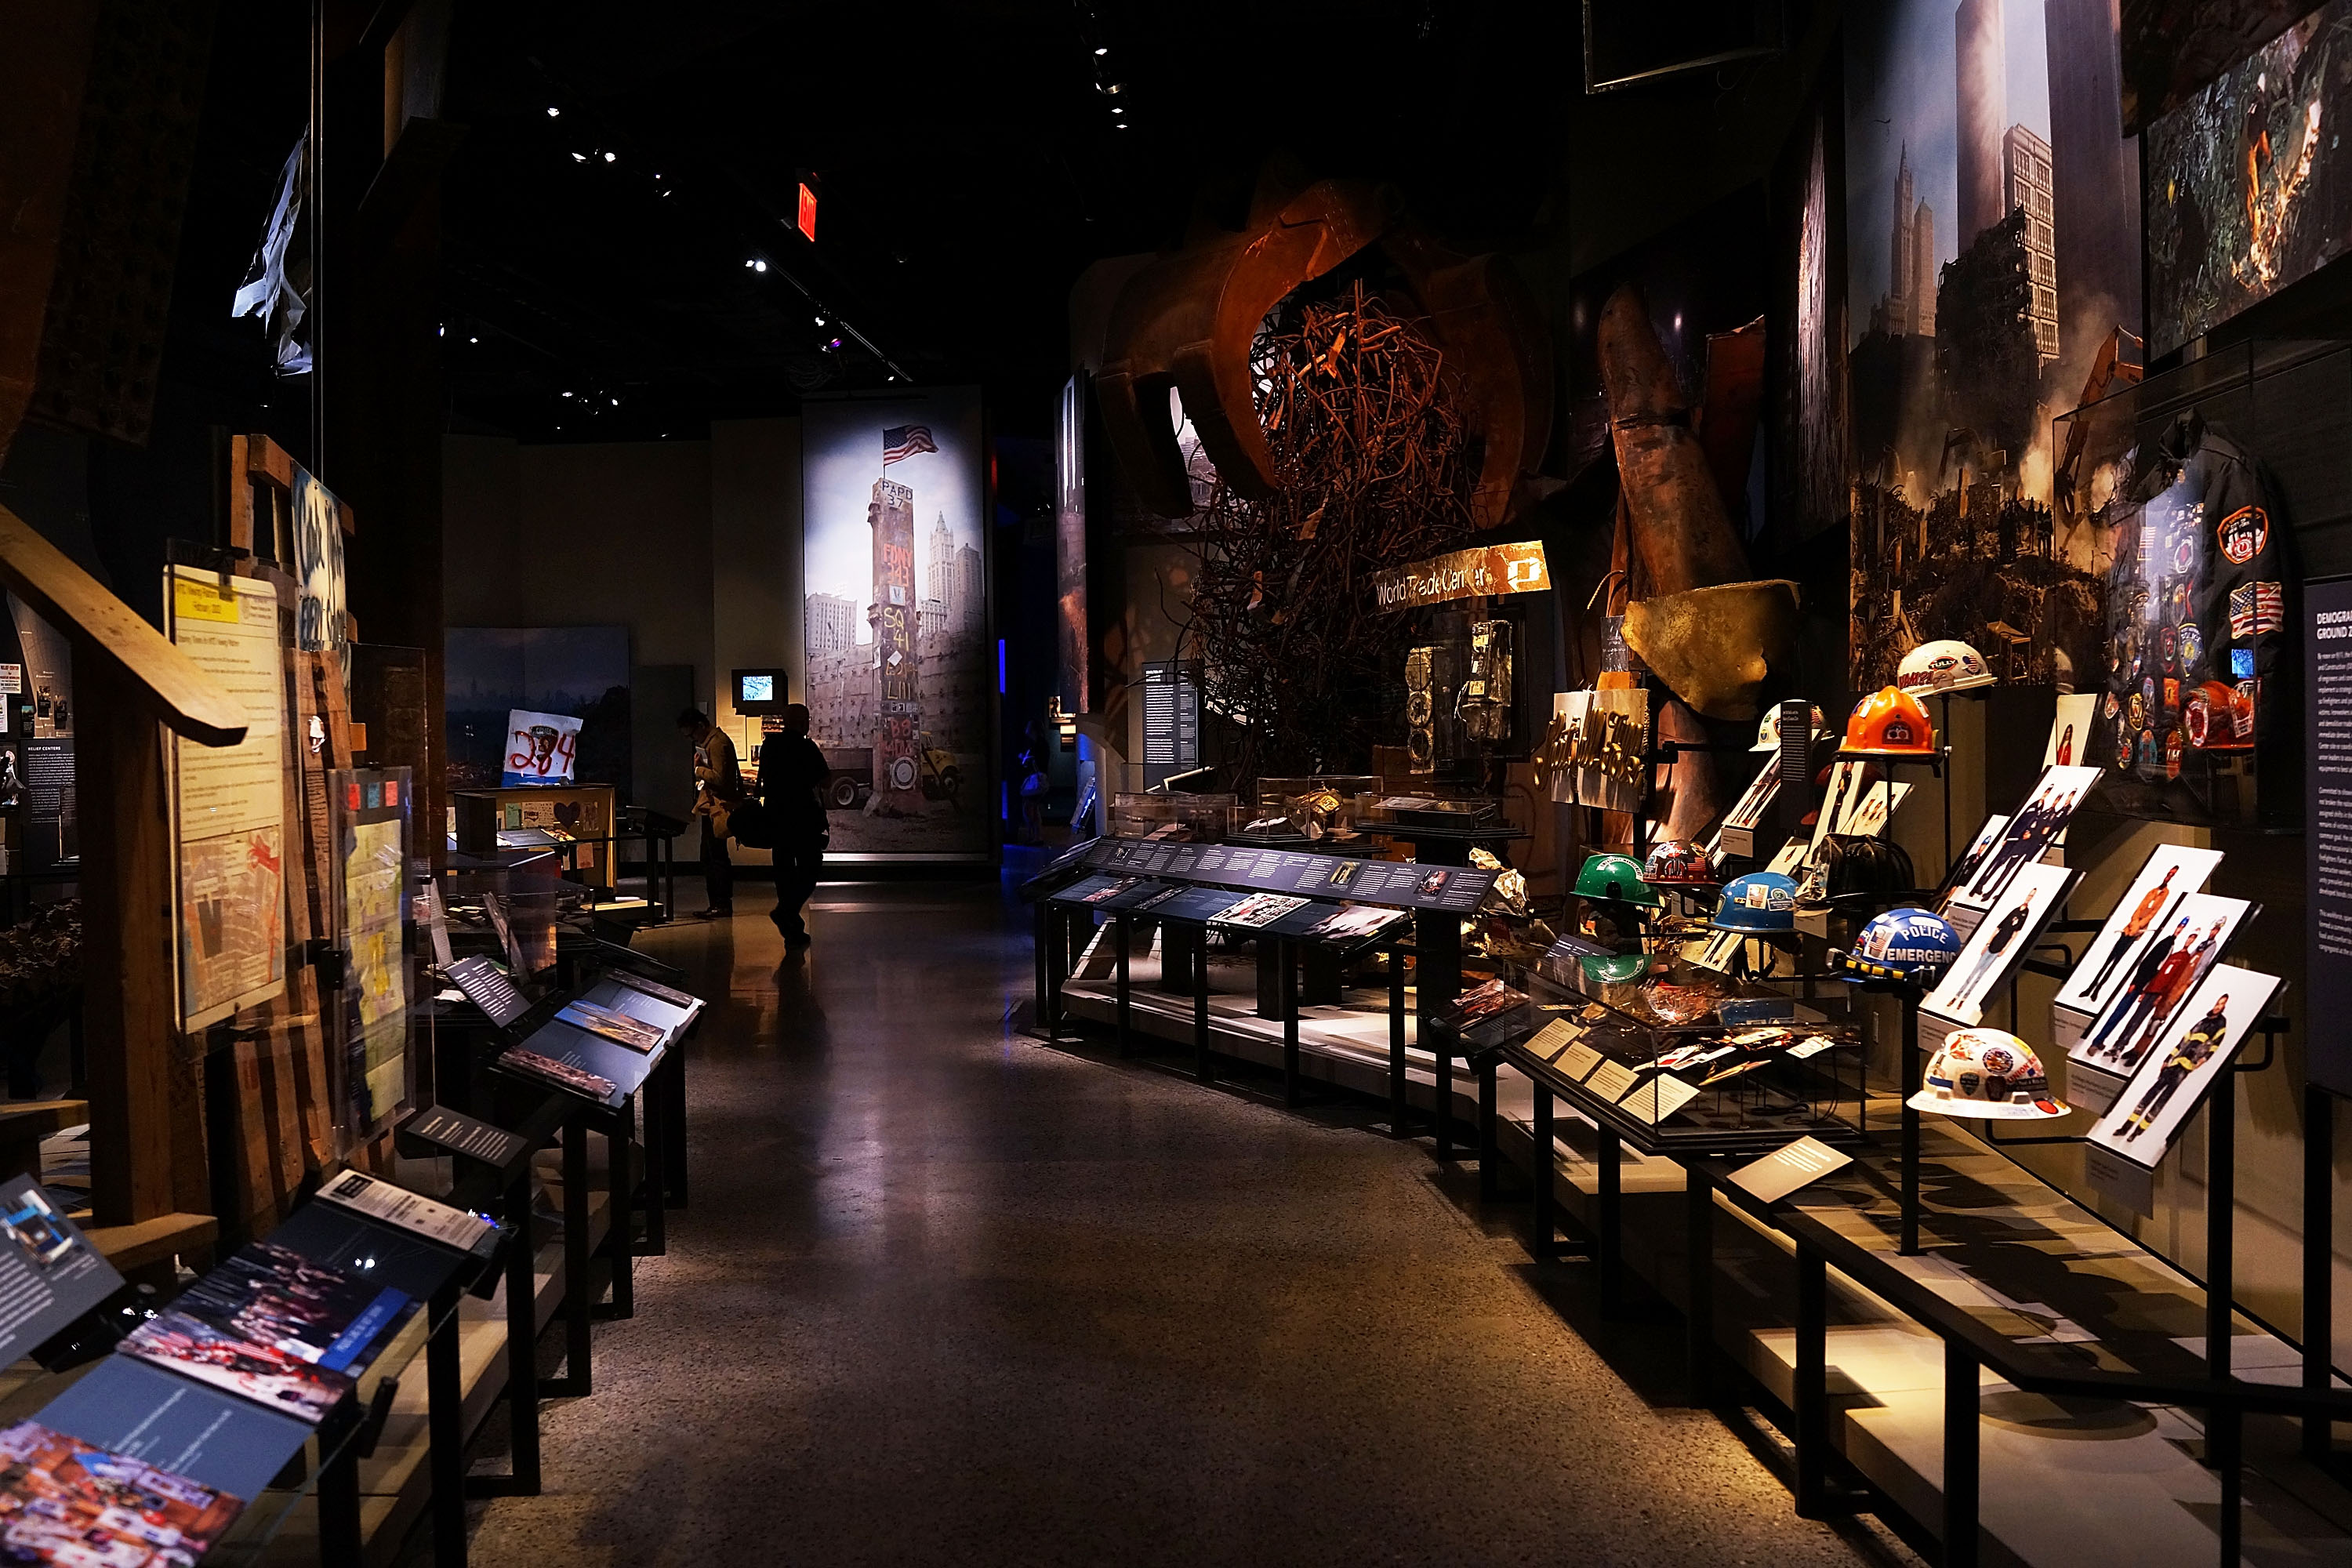 Artifacts from Ground Zero are viewed during a preview of the National September 11 Memorial Museum on May 14, 2014. (Photo by Spencer Platt/Getty Images)